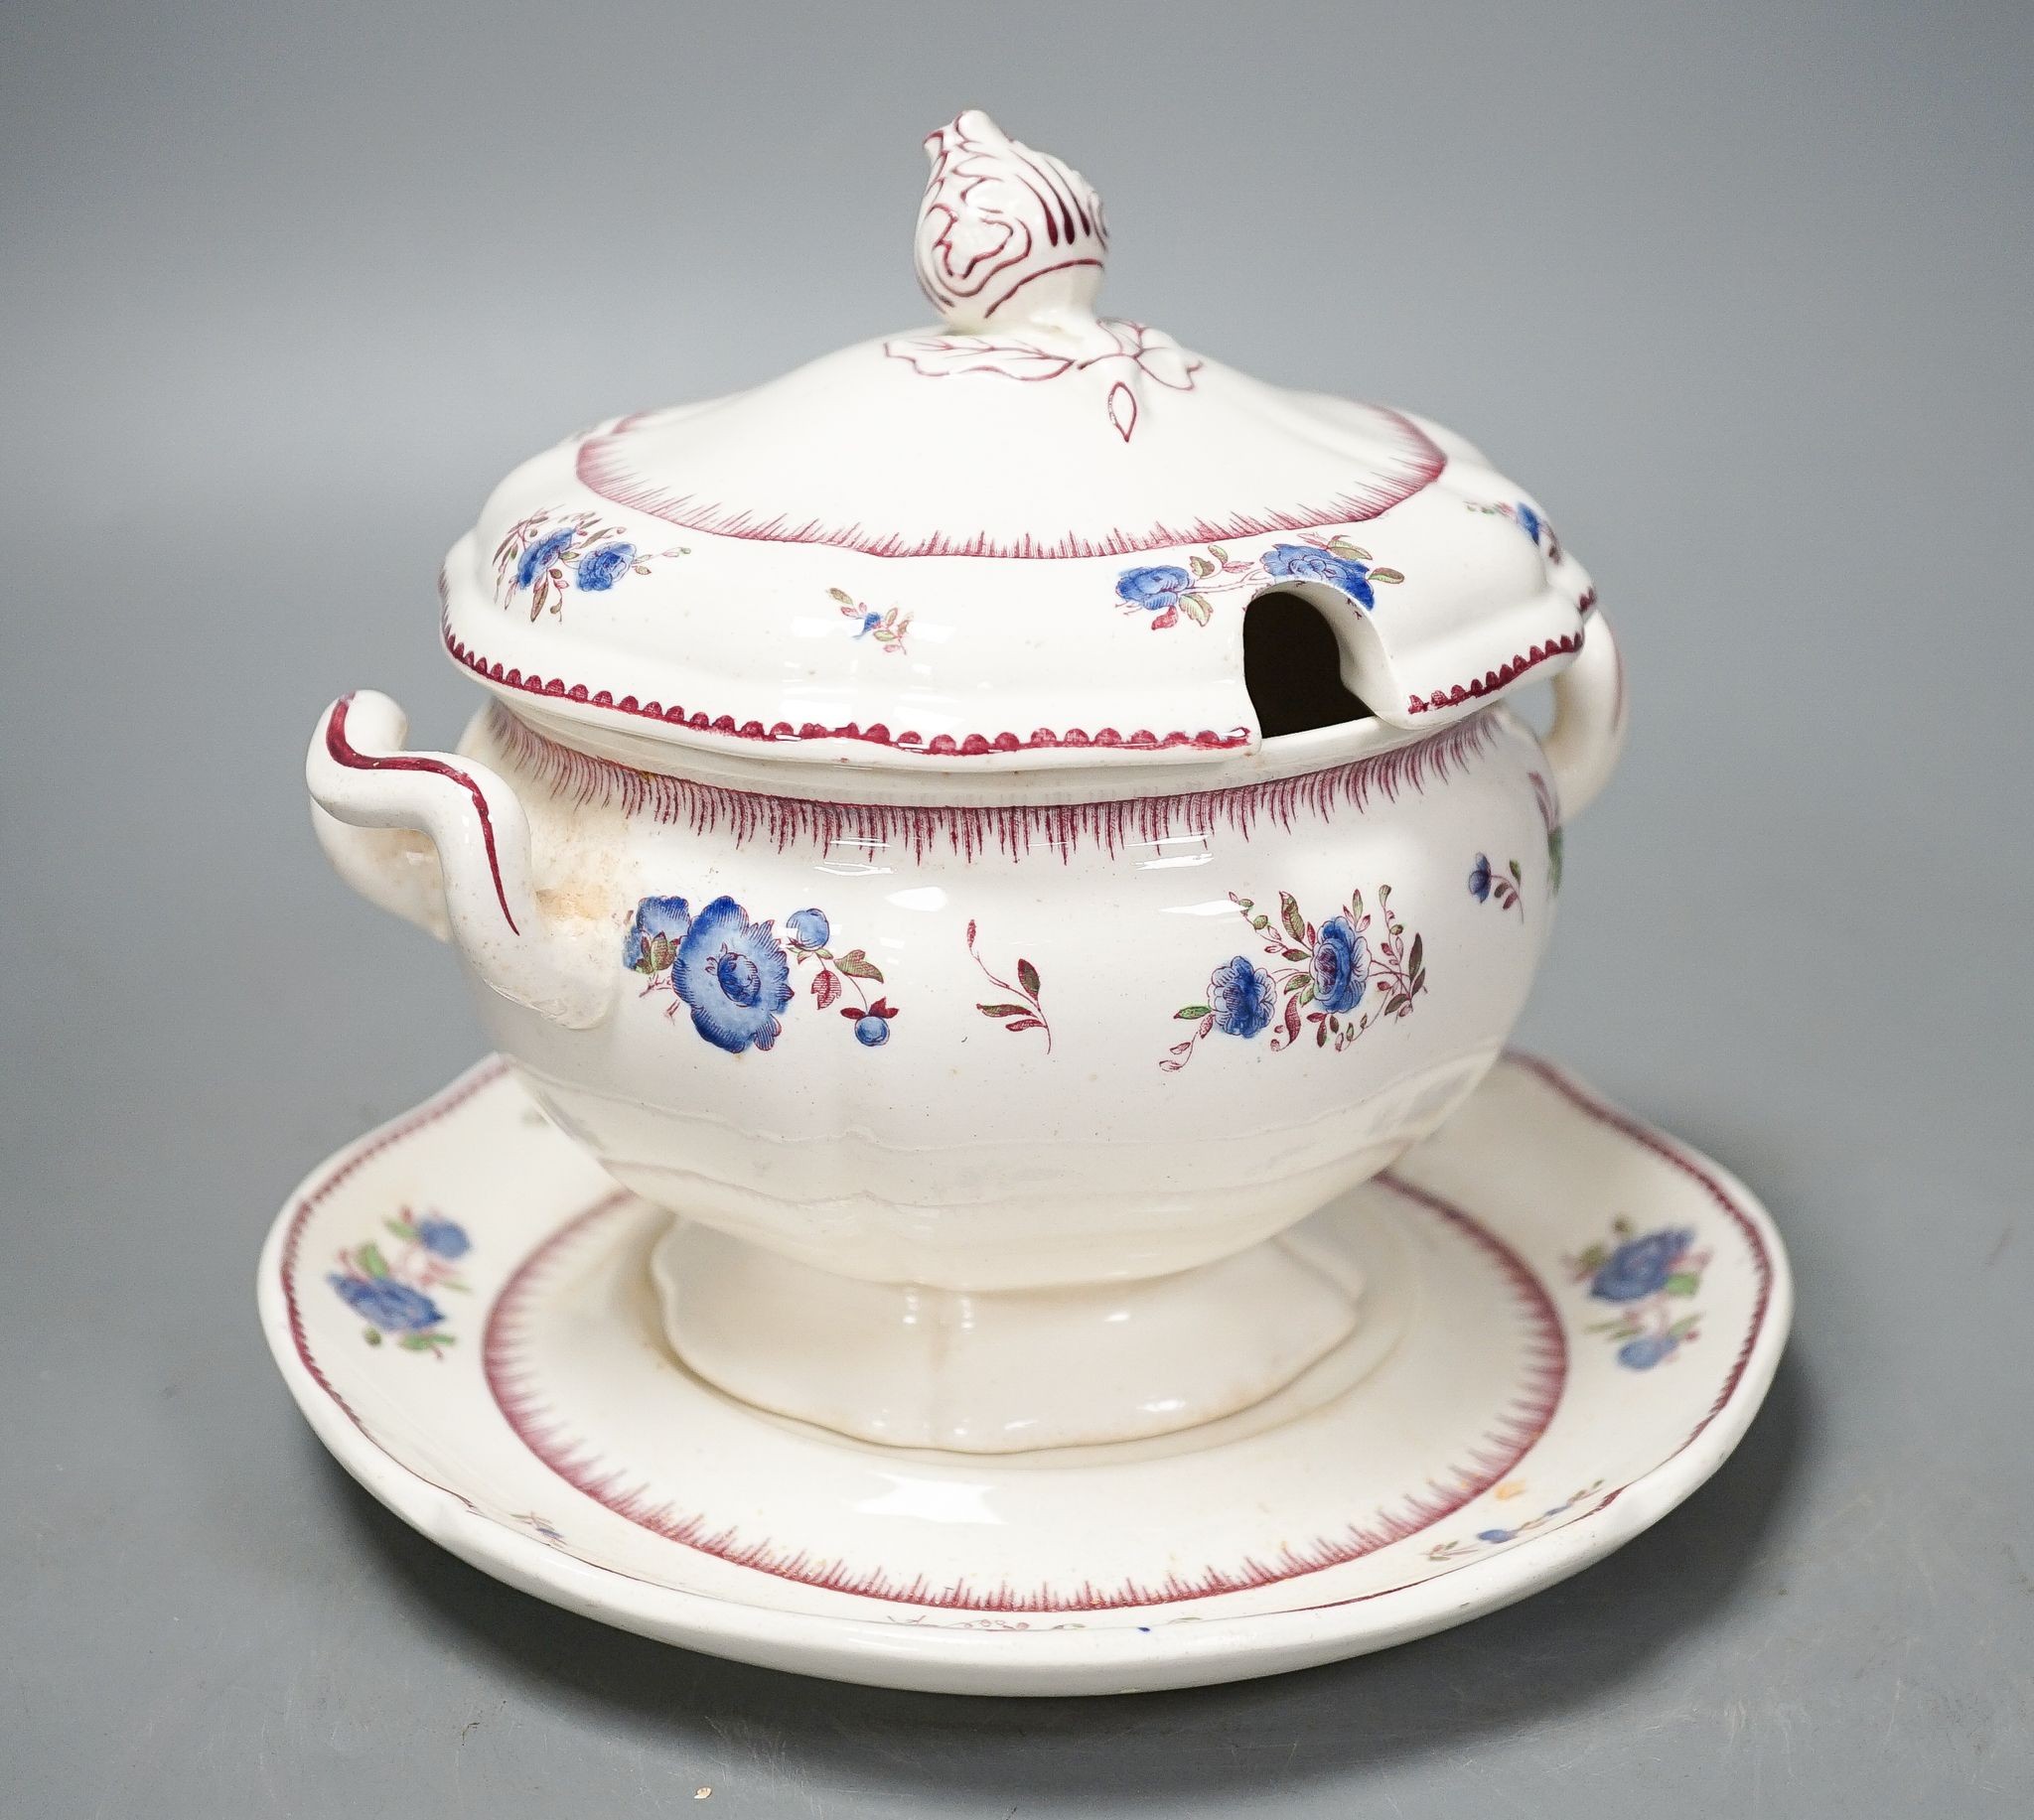 A Wedgwood earthenware part dinner service